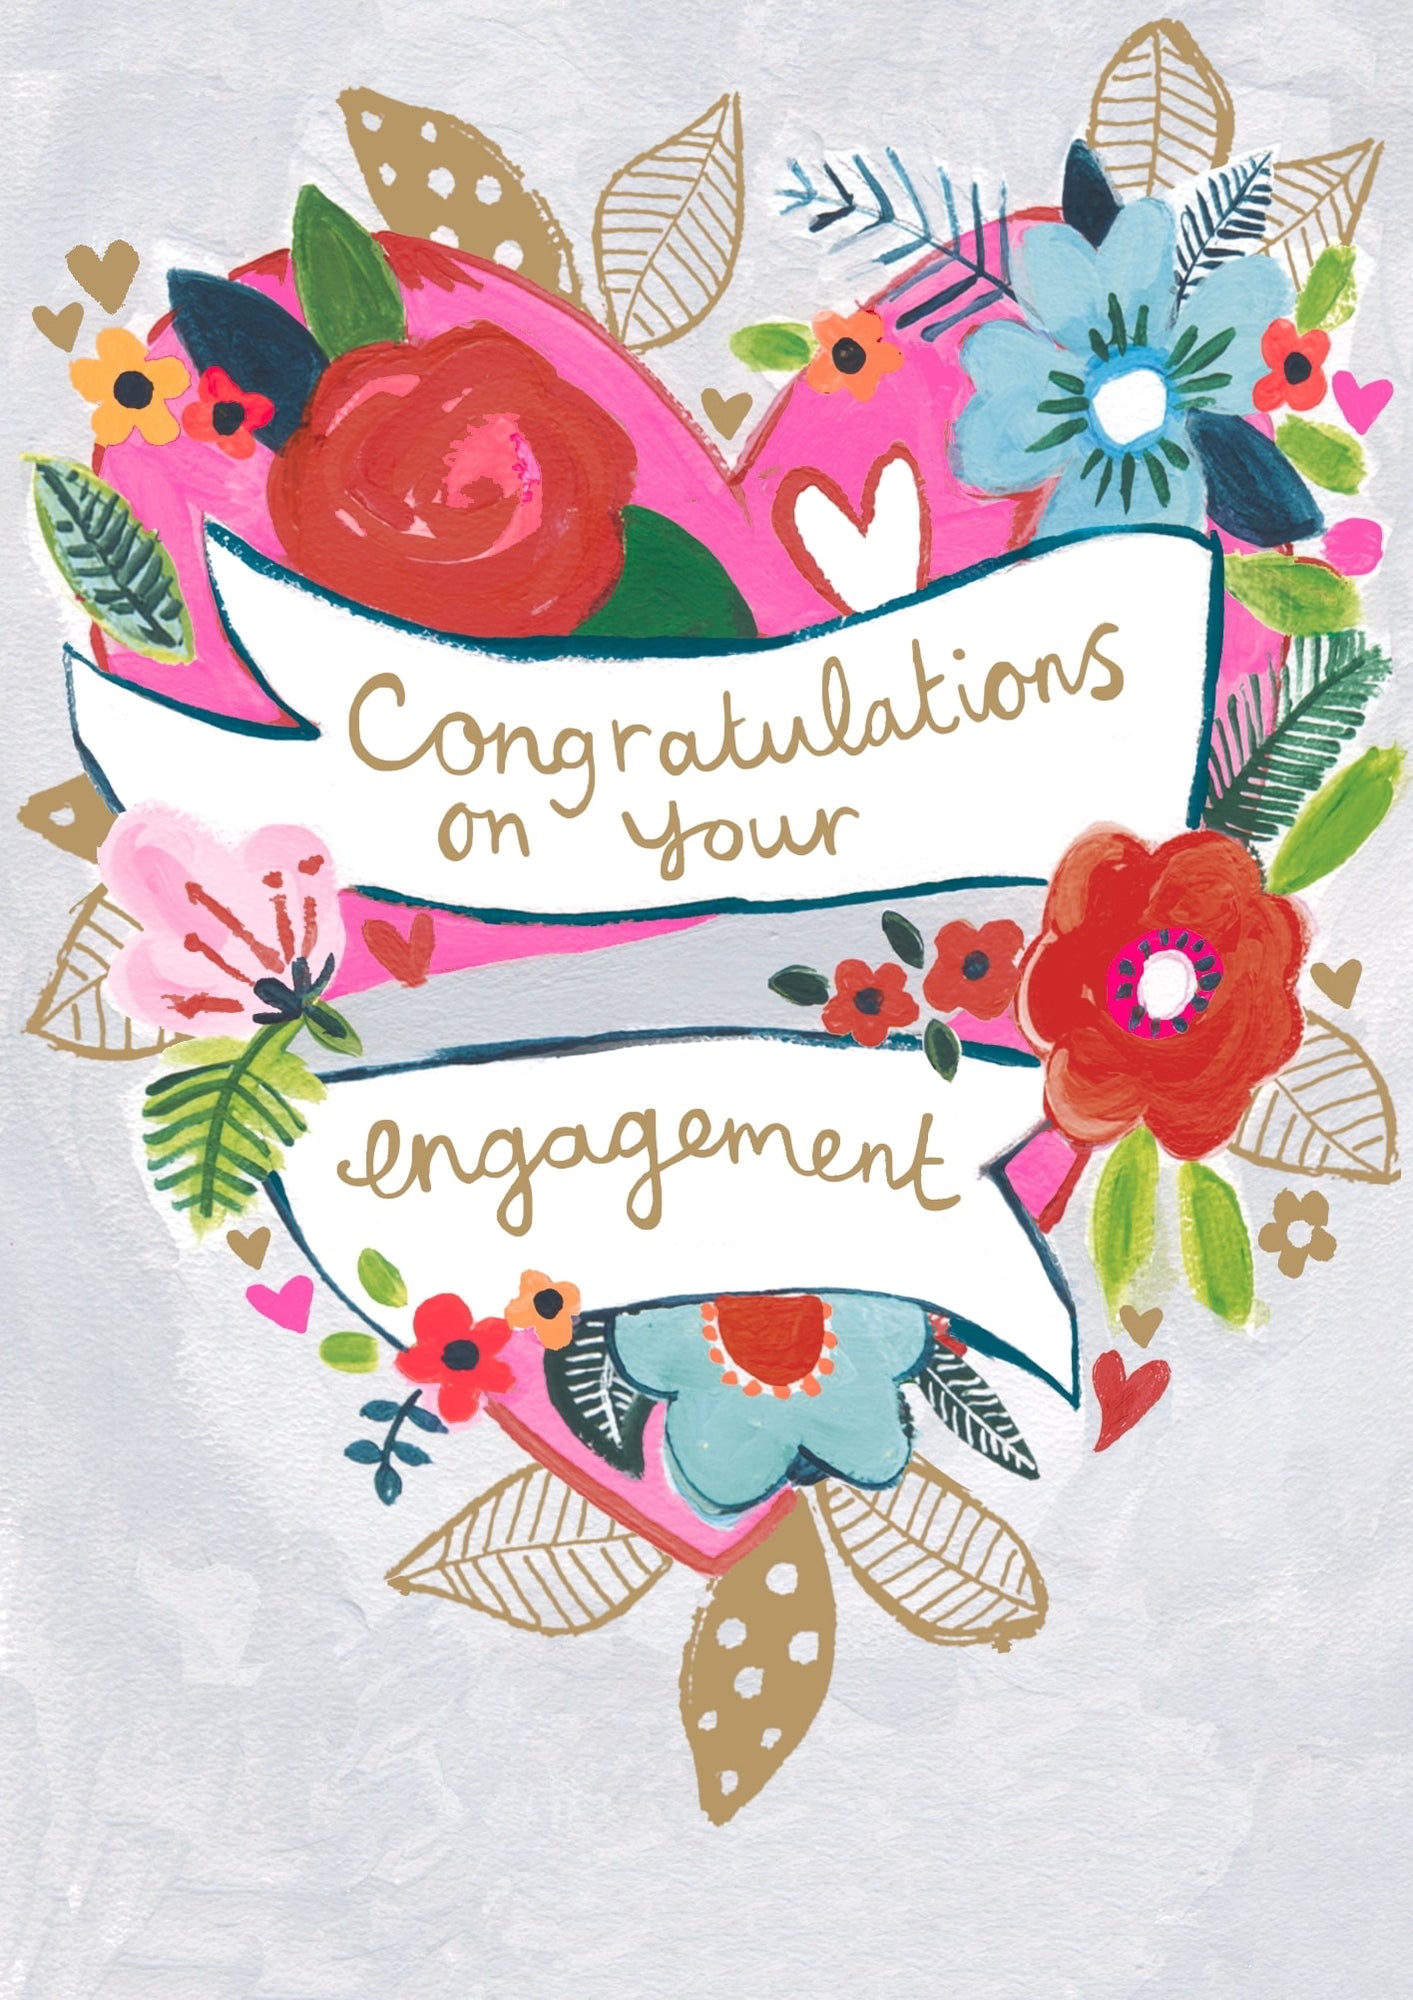 Congratulations Heart Banner Engagement Card from Penny Black